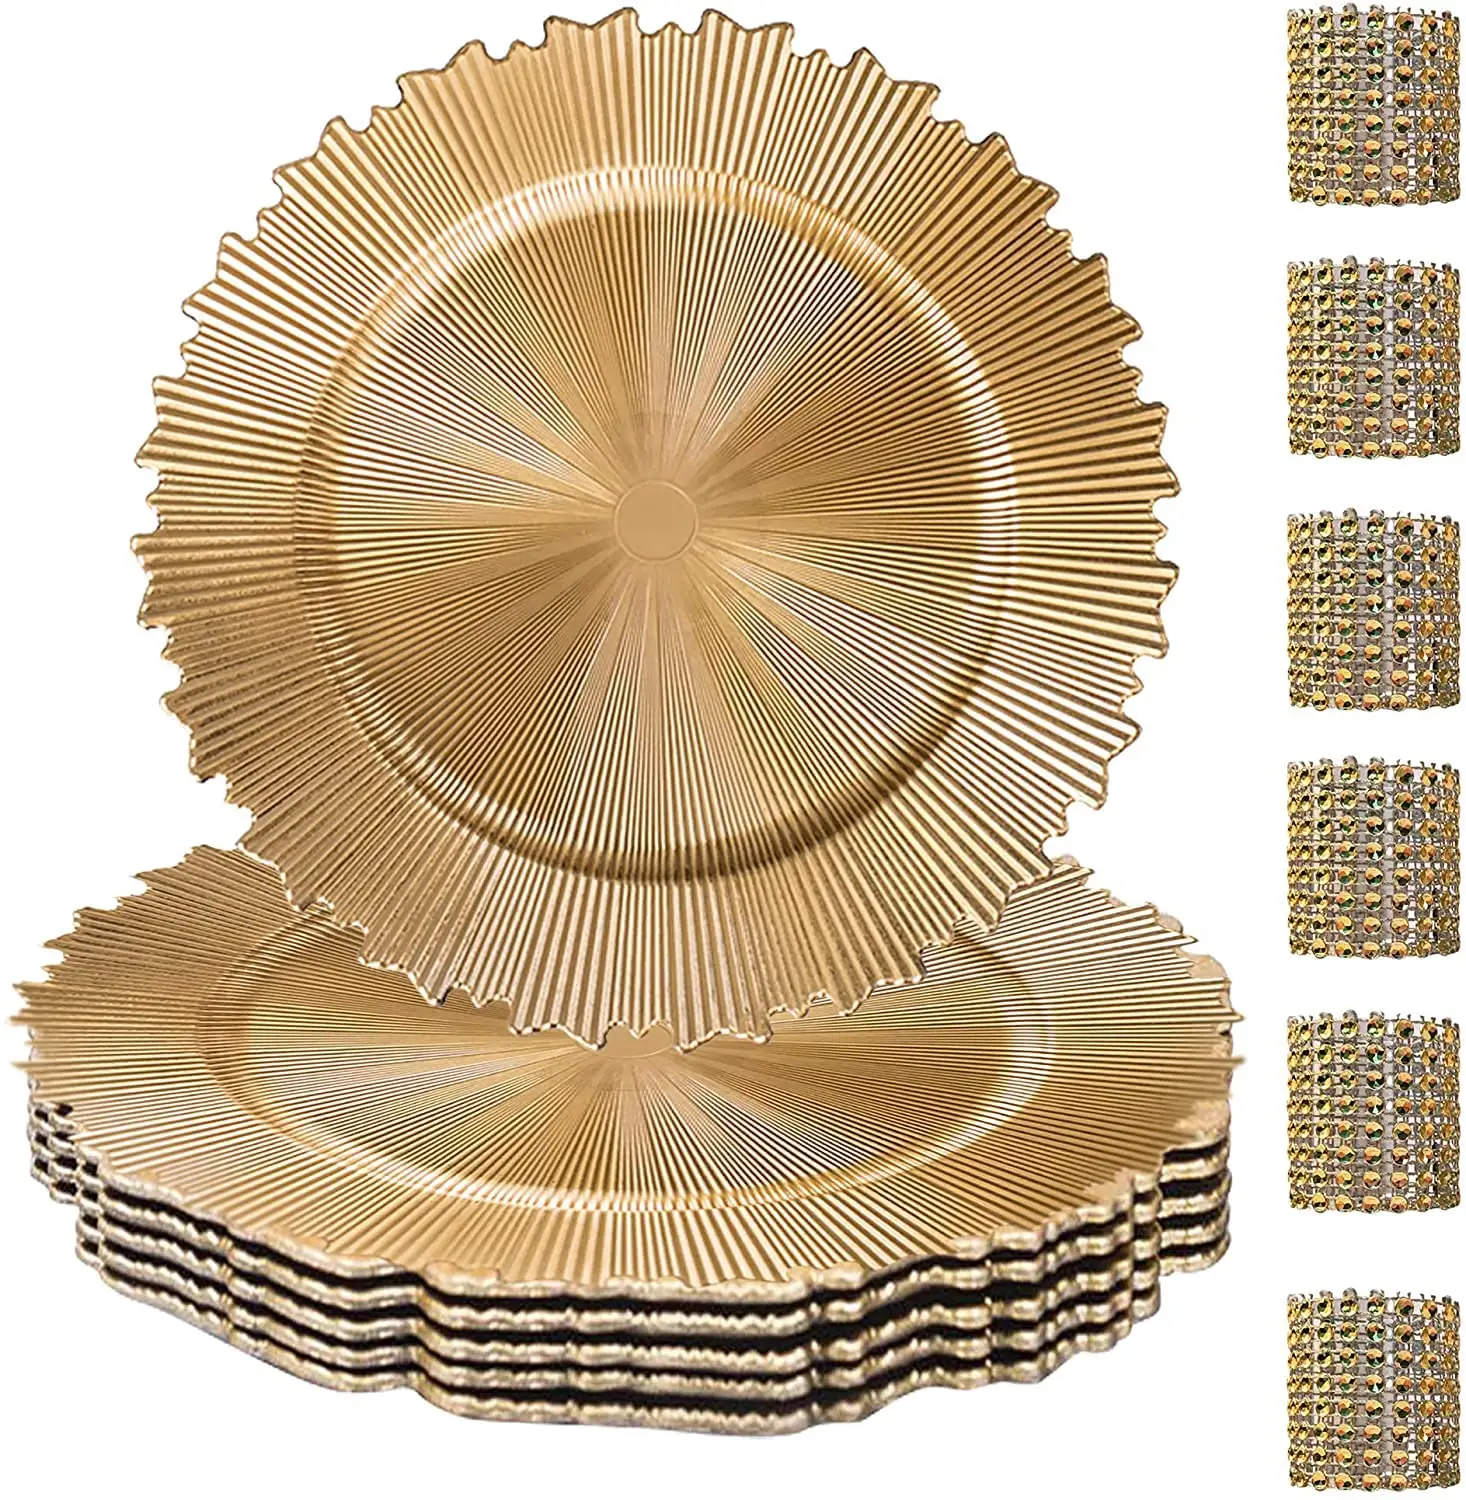 Plastic Modern Charger Plates for Dinner Plates Table Decor Gold for Weddings Holiday or Party Brown Box Customized Logo >10